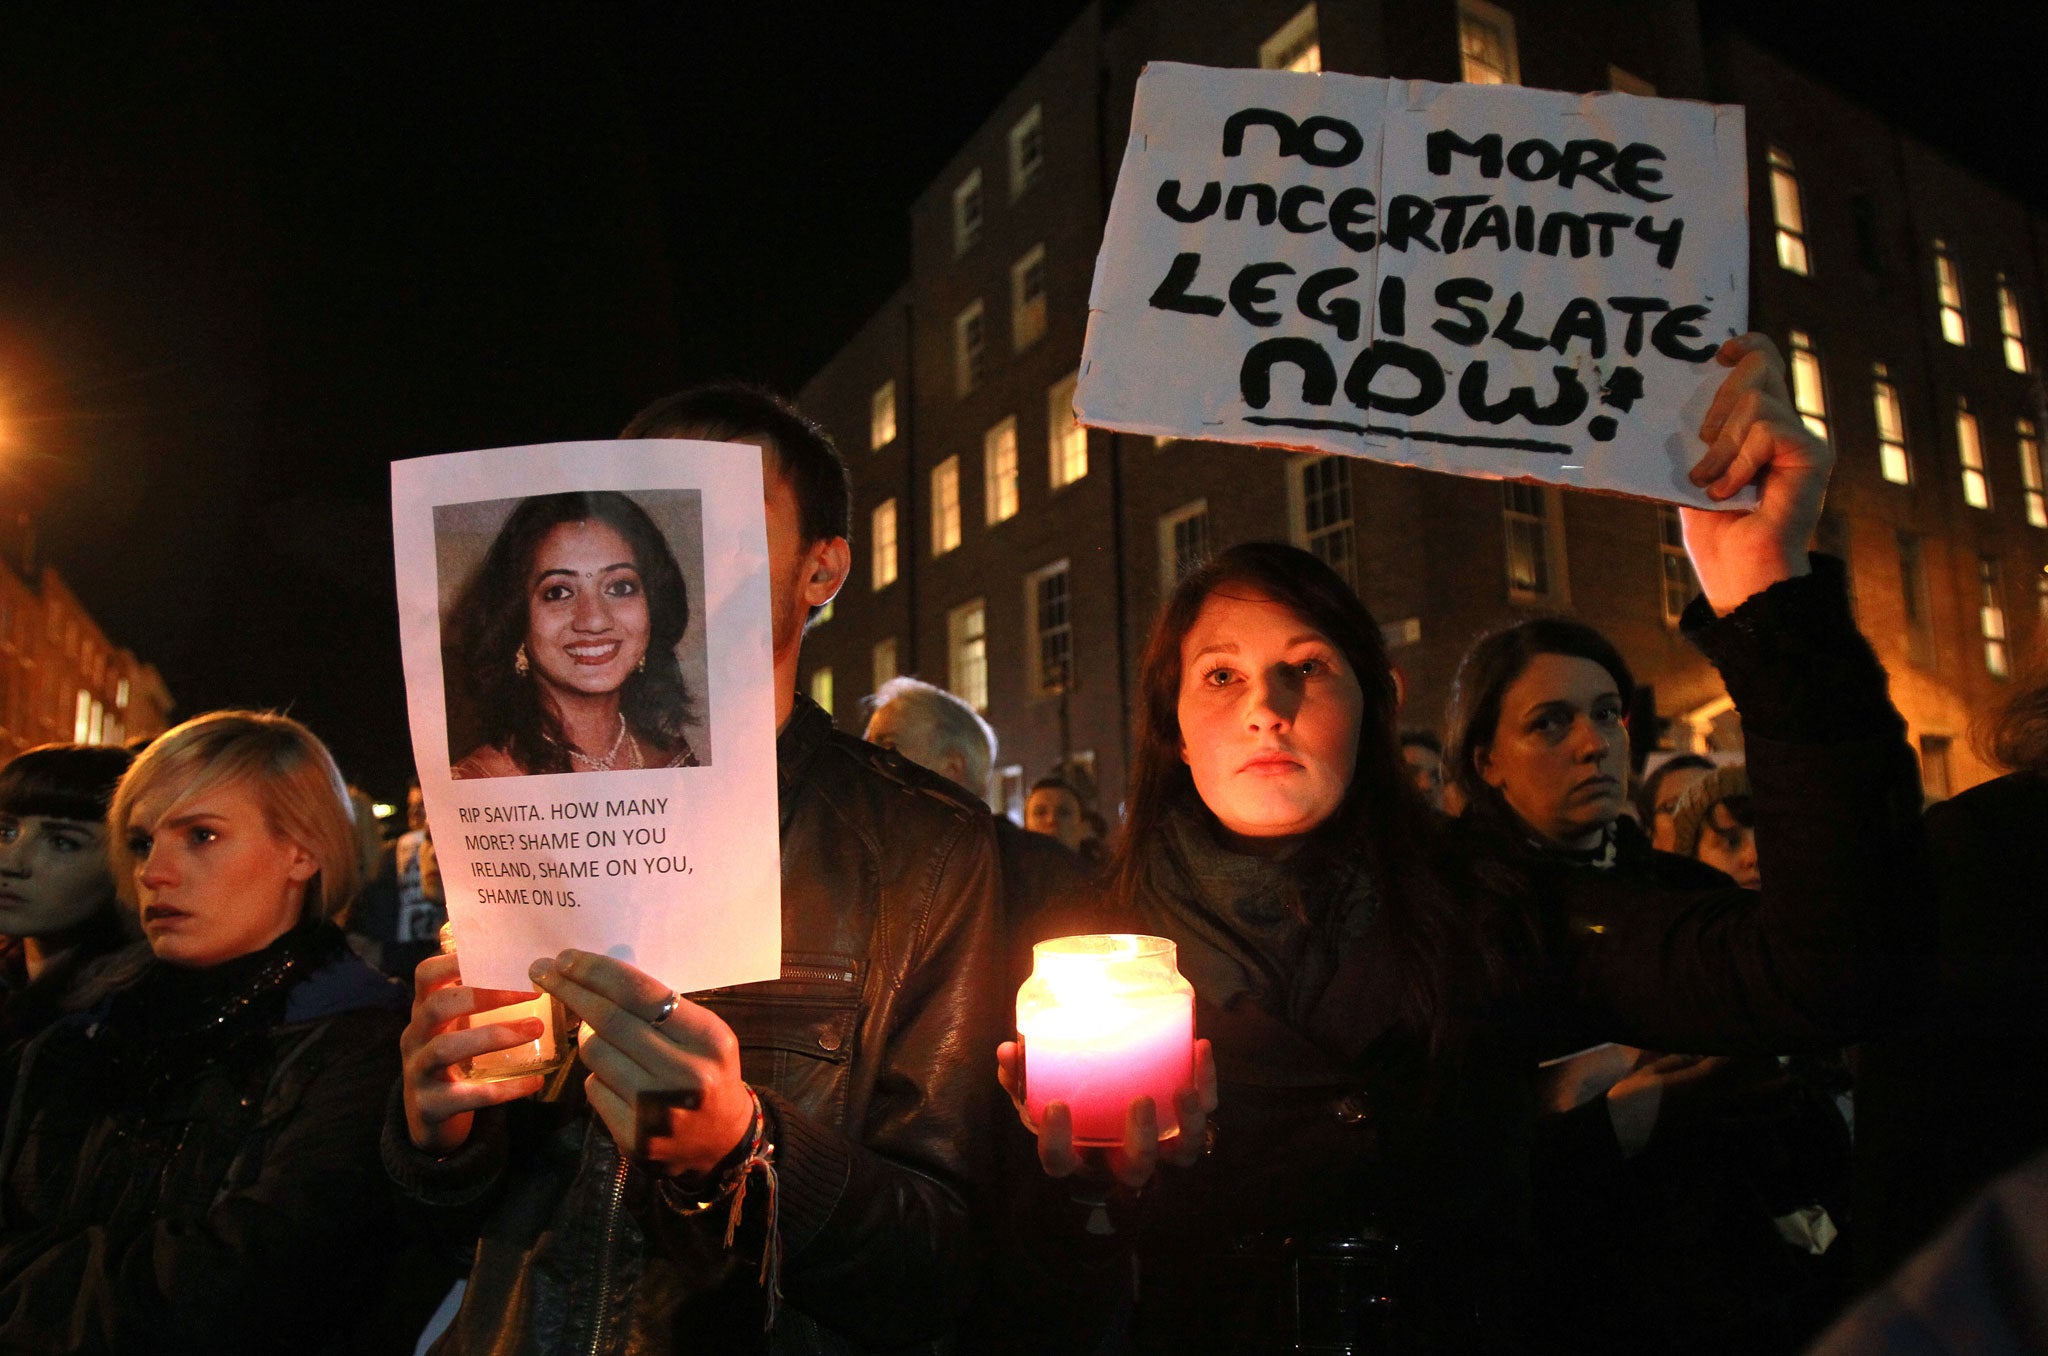 Protestors hold pictures of Savita Halappanavar, who was allegedly refused a pregnancy termination after doctors told her it was a Catholic country, in Dublin, Ireland, on November 14, 2012.